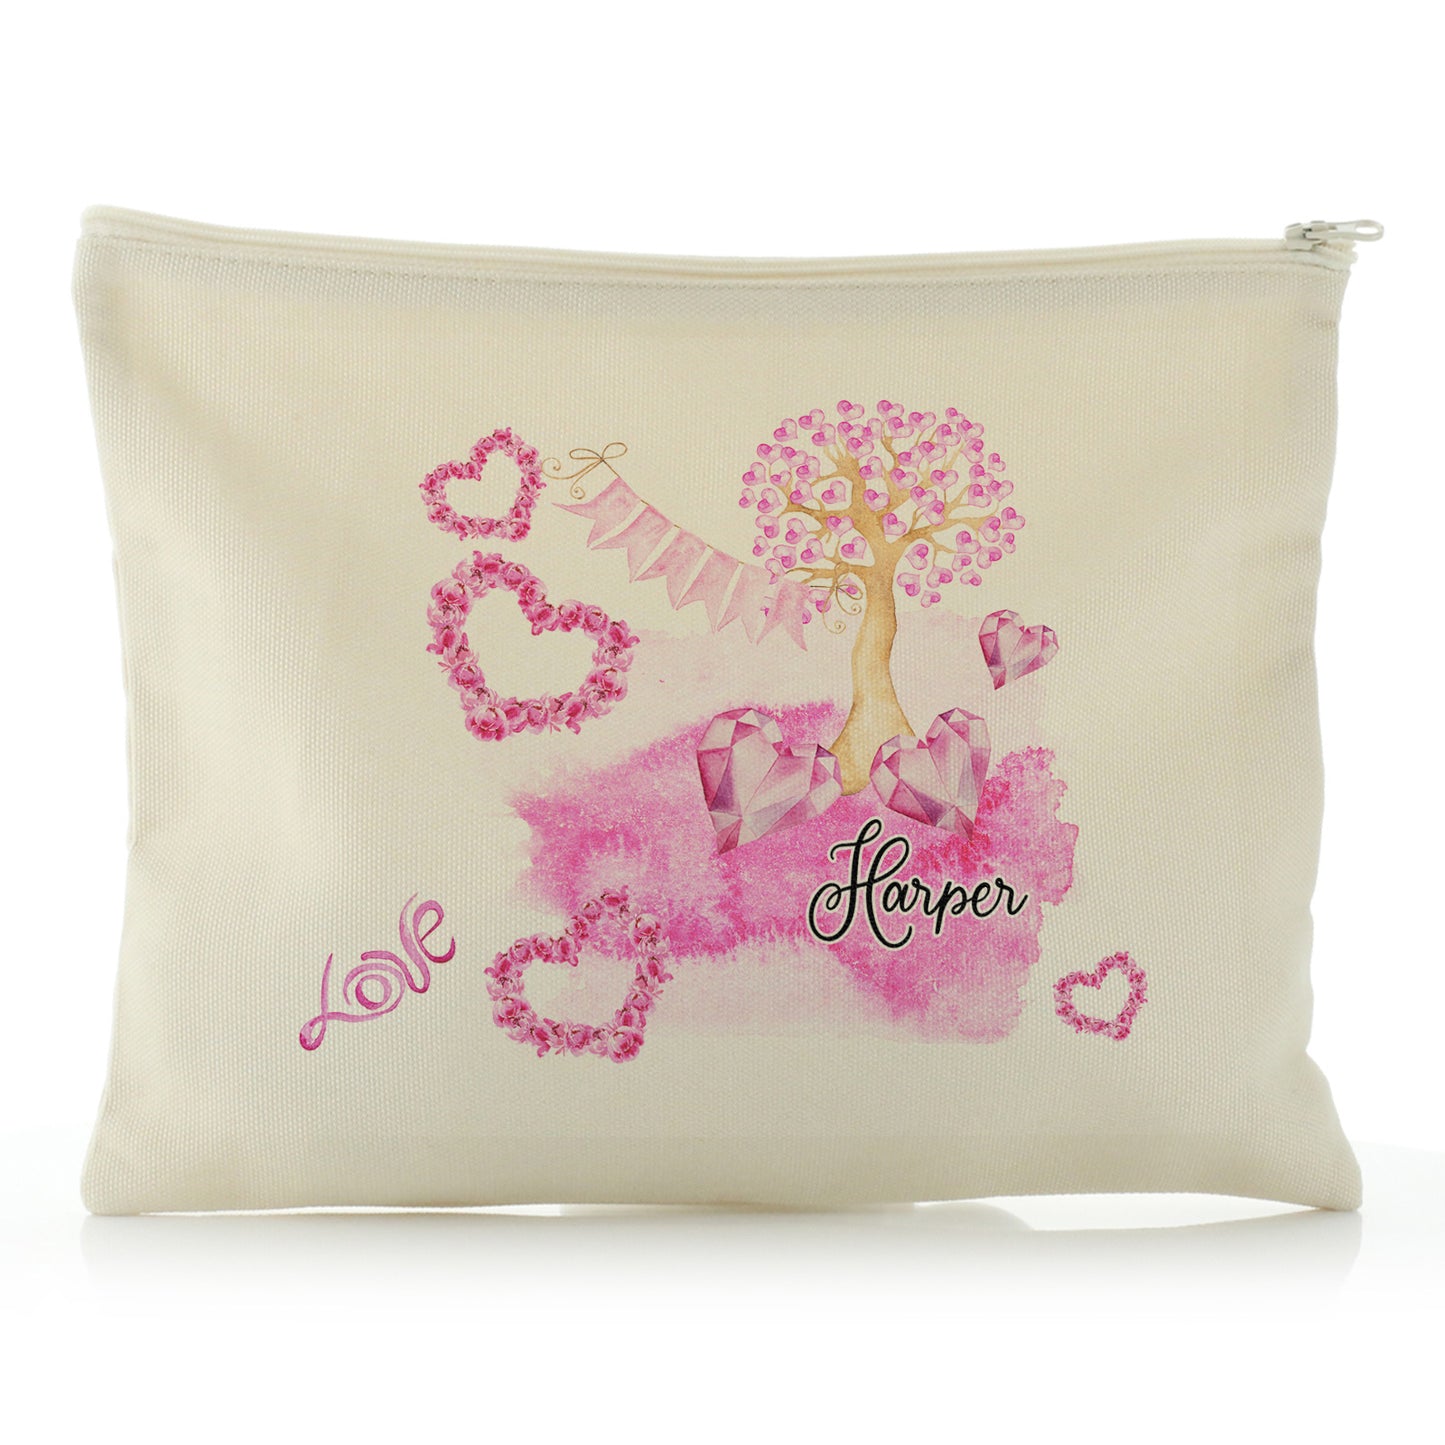 Personalised Canvas Zip Bag with Stylish Text and Pink Love Landscape Print